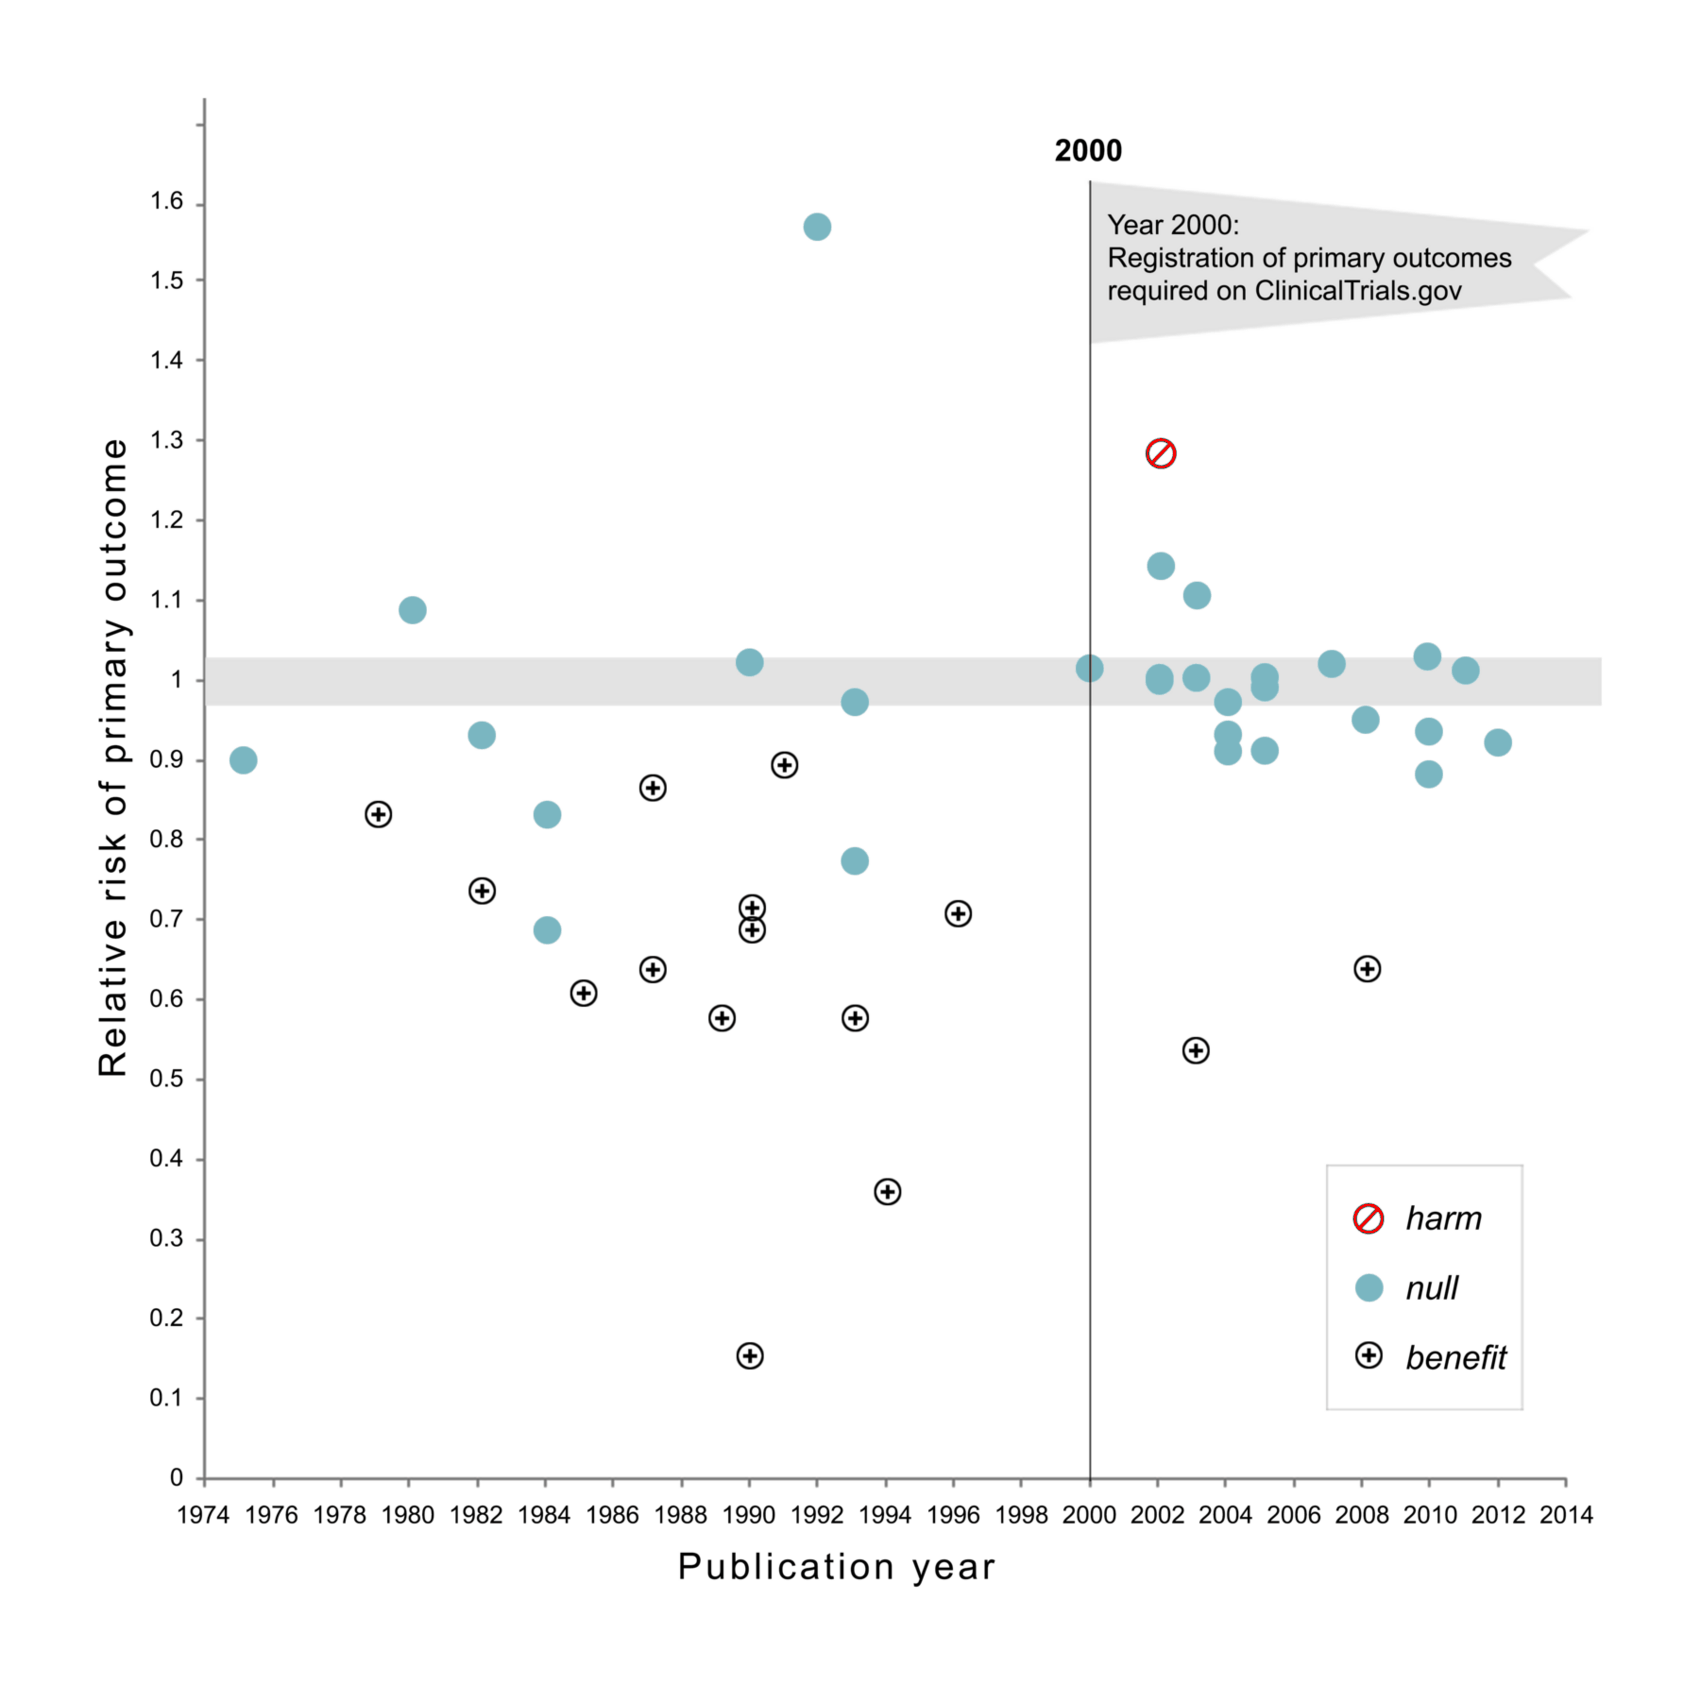 Figure 1: Relative risk of showing benefit or harm of treatment by year of publication for large NHLBI trials on pharmaceutical and dietary supplement interventions. Positive trials are indicated by the plus signs while trials showing harm are indicated by a diagonal line within a circle. Prior to 2000 when trials were not registered in ClinicalTrials.gov, there was substantial variability in outcome. Following the imposition of the requirement that trials preregister in ClinicalTrials.gov the relative risk on primary outcomes showed considerably less variability around 1.0.